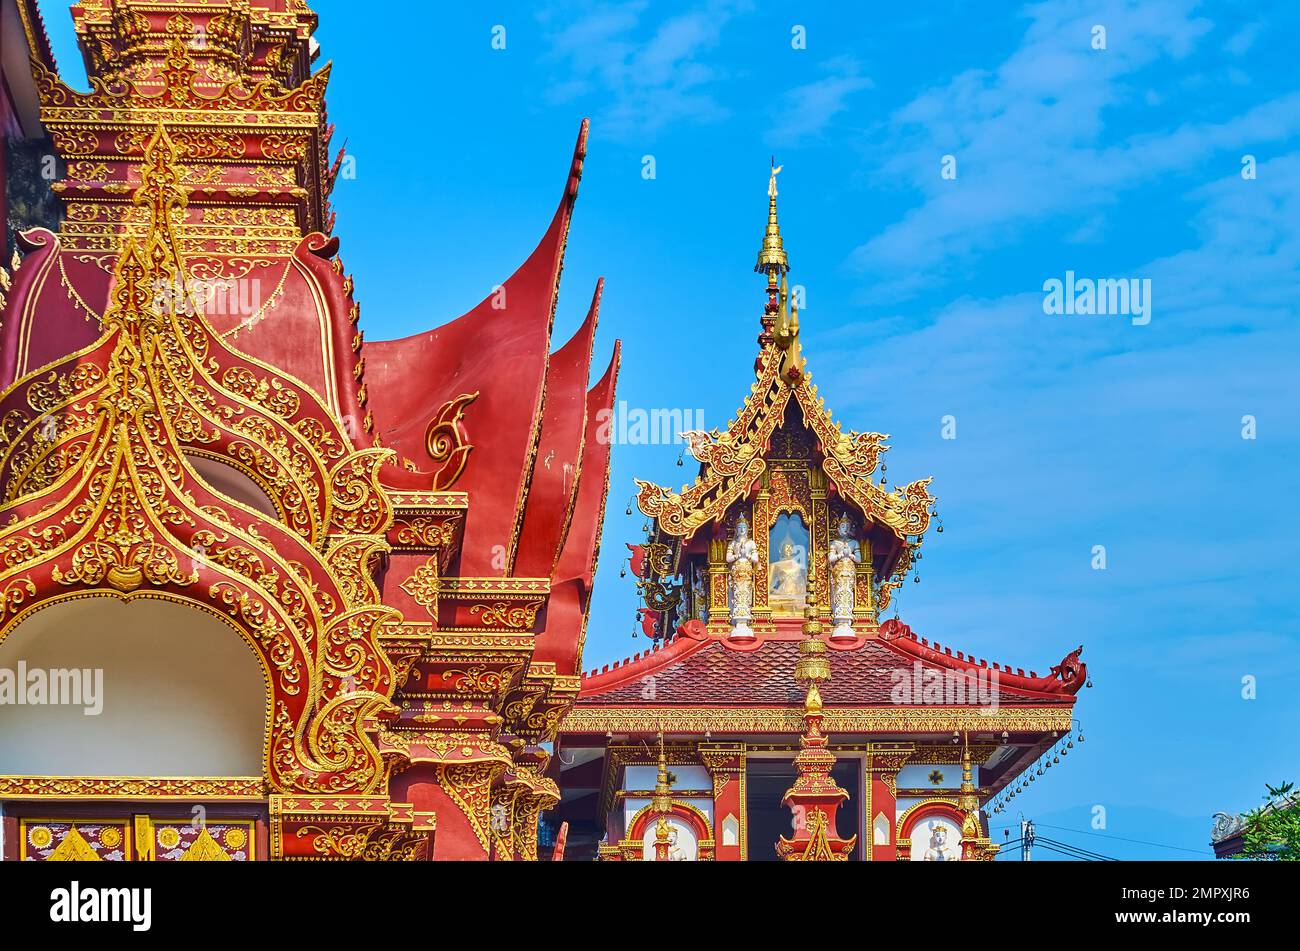 Traditional Lanna roof decorations of temple buildings in Wat Saen Muang Ma, Chiang Mai, Thailand Stock Photo